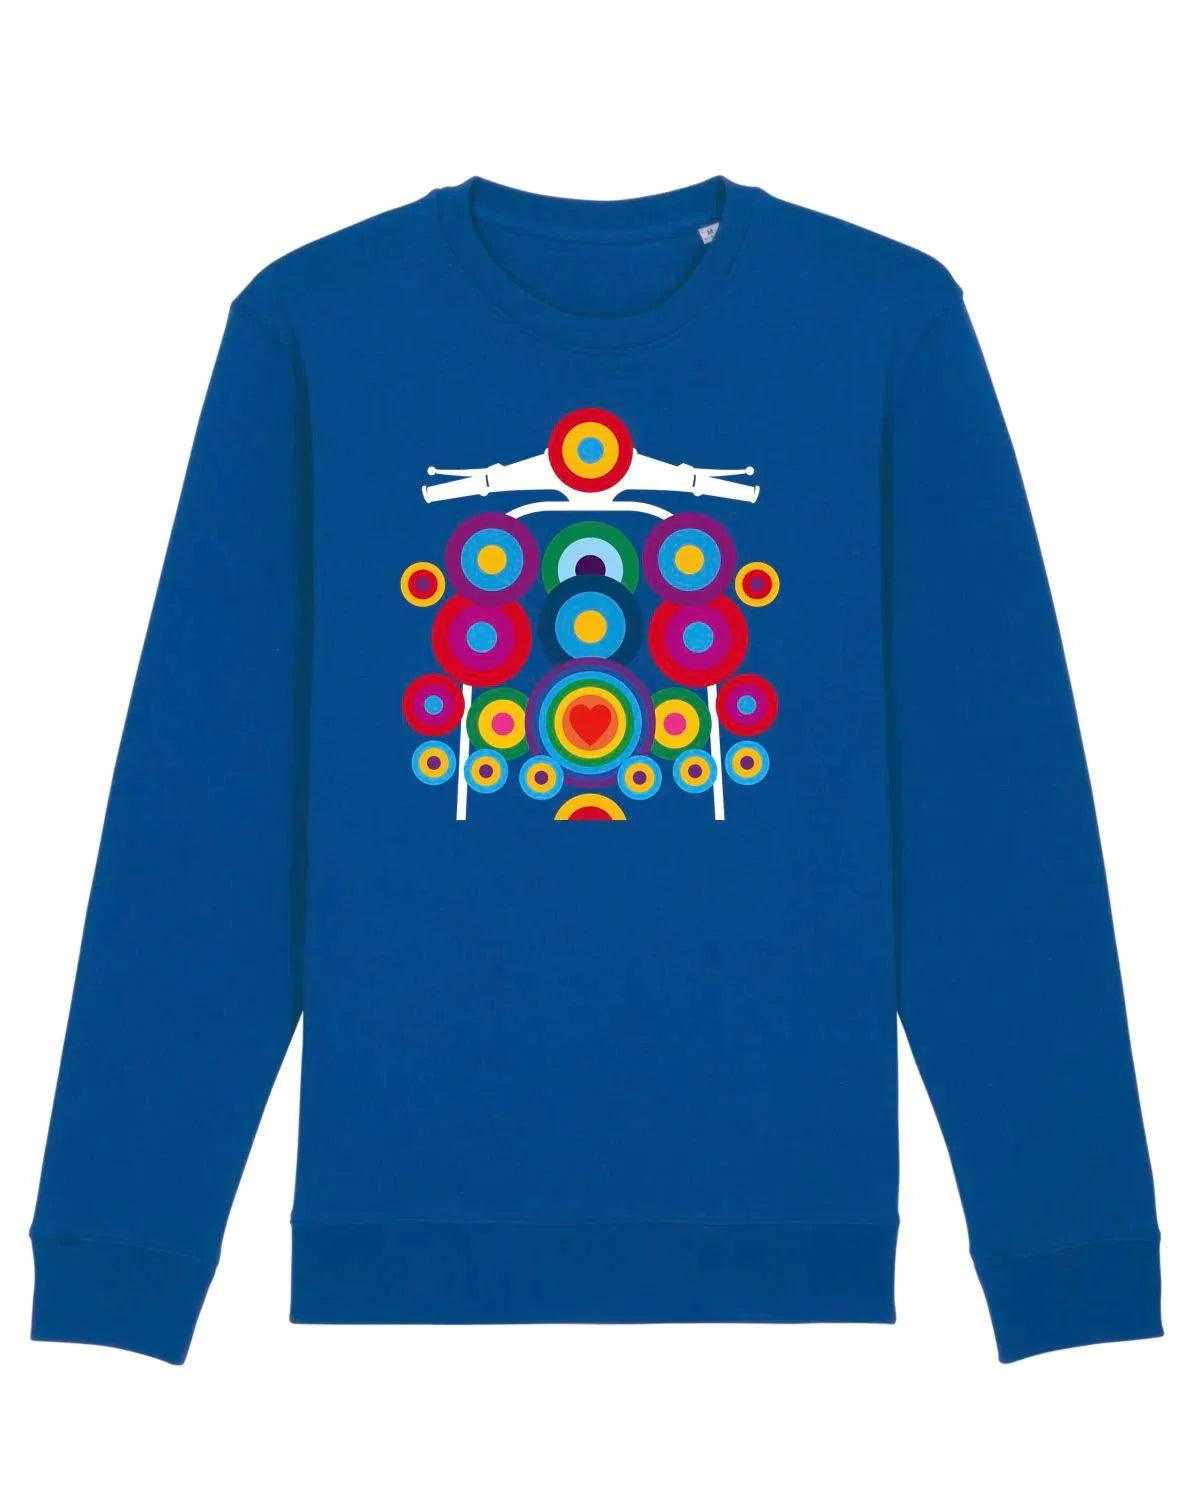 POP ART SCOOTER: Sweatshirt Inspired by Mod Culture and Peter Blake - SOUND IS COLOUR